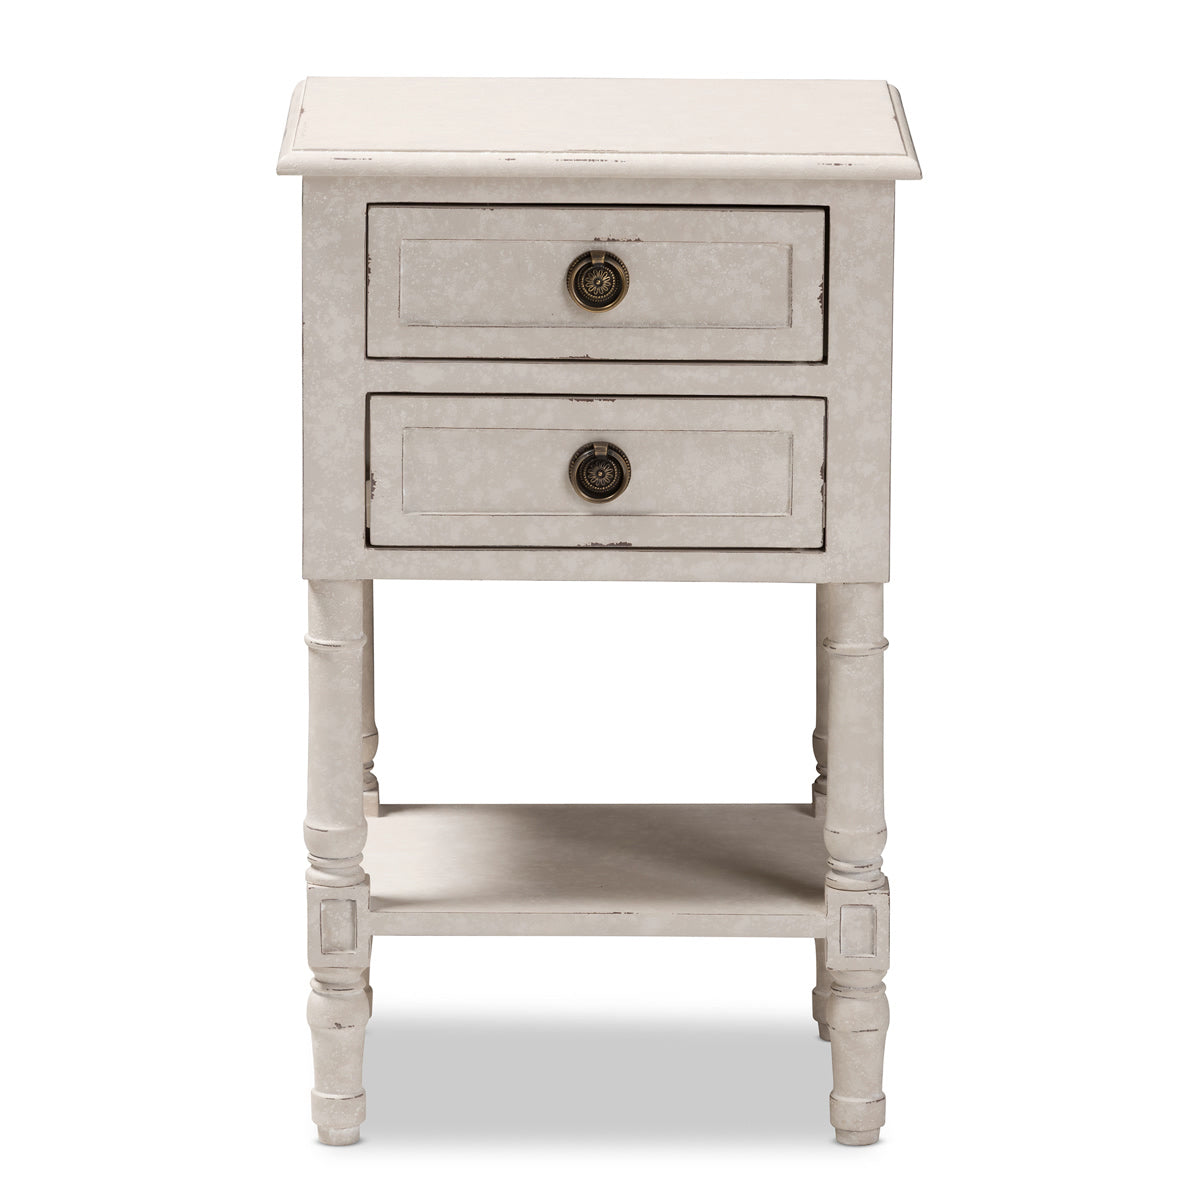 Baxton Studio Lenore Country Cottage Farmhouse Whitewashed 2-Drawer Nightstand Baxton Studio-nightstands-Minimal And Modern - 3